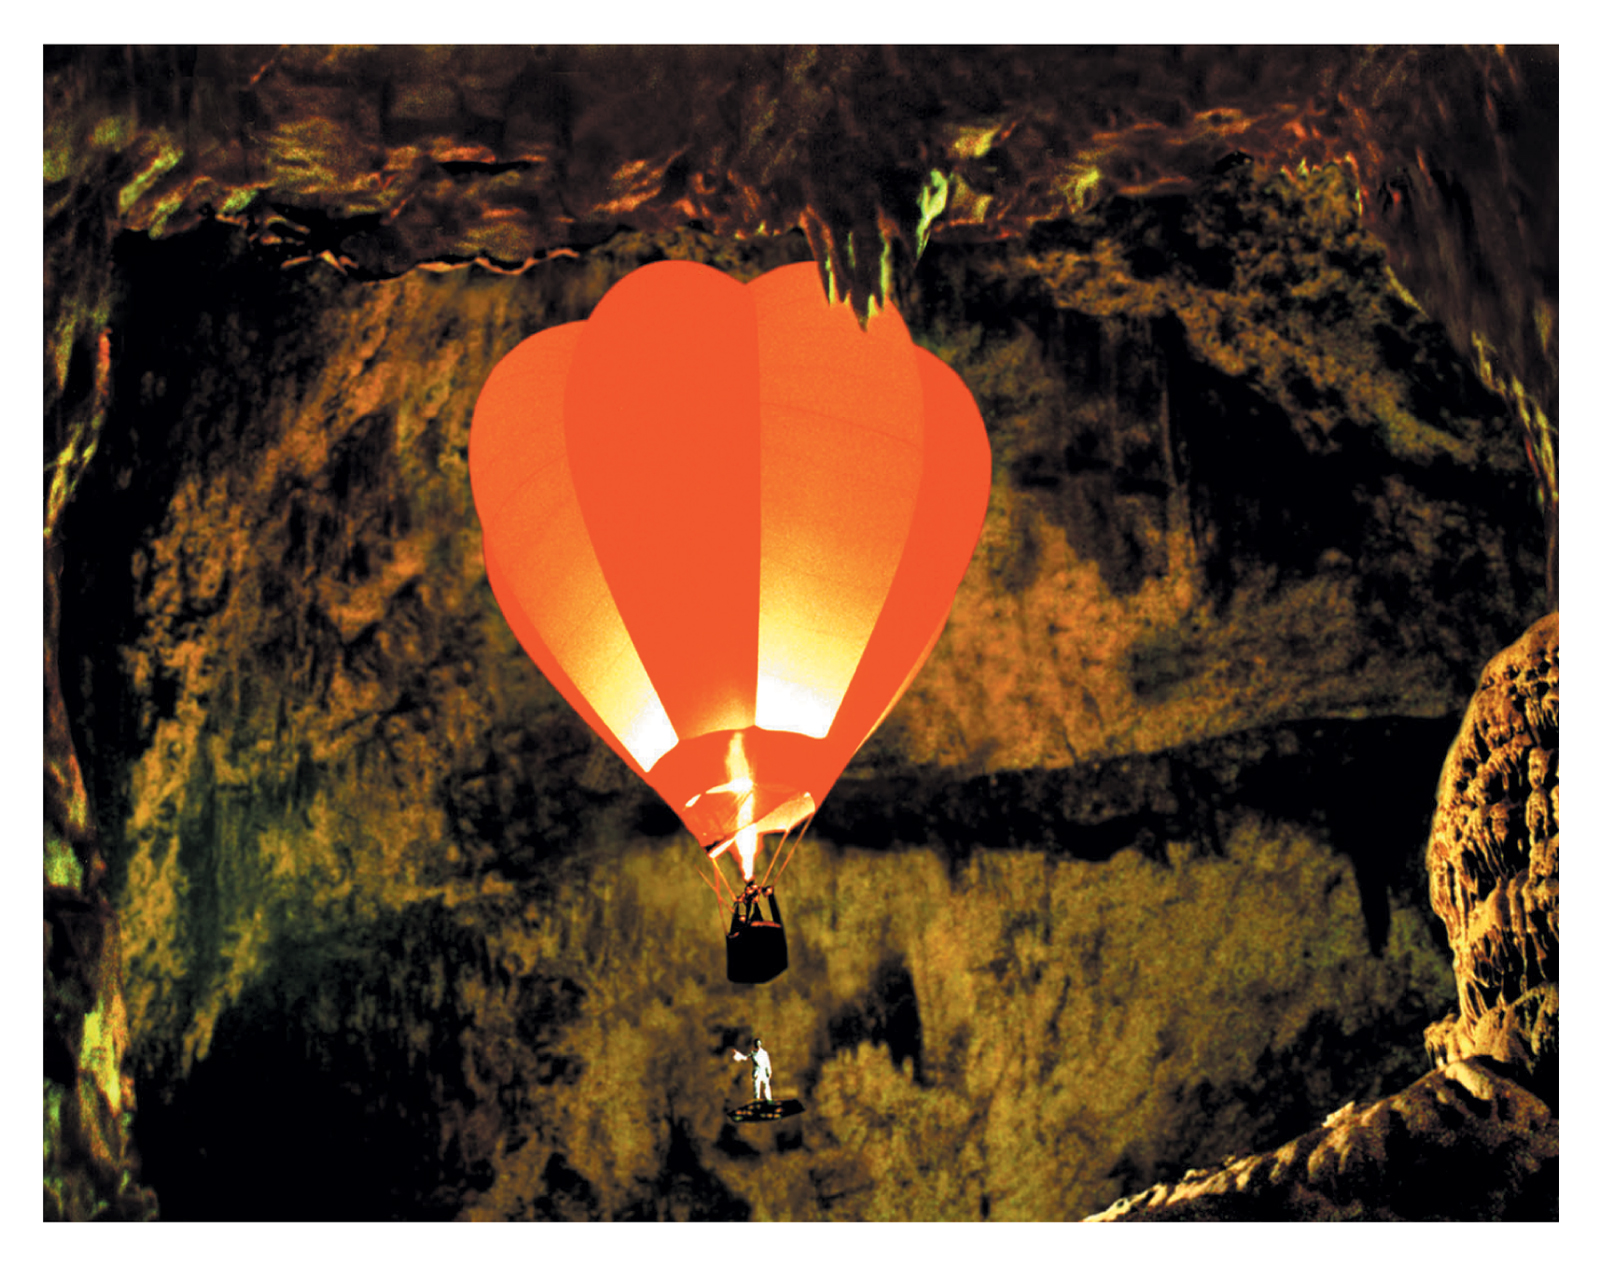 The front of this issue’s postcard by artist Vadim Fishkin titled “Air Balloon in the Cave” depicting a hot air balloon being flown inside the Postojnska Jama cave in Slovenia.